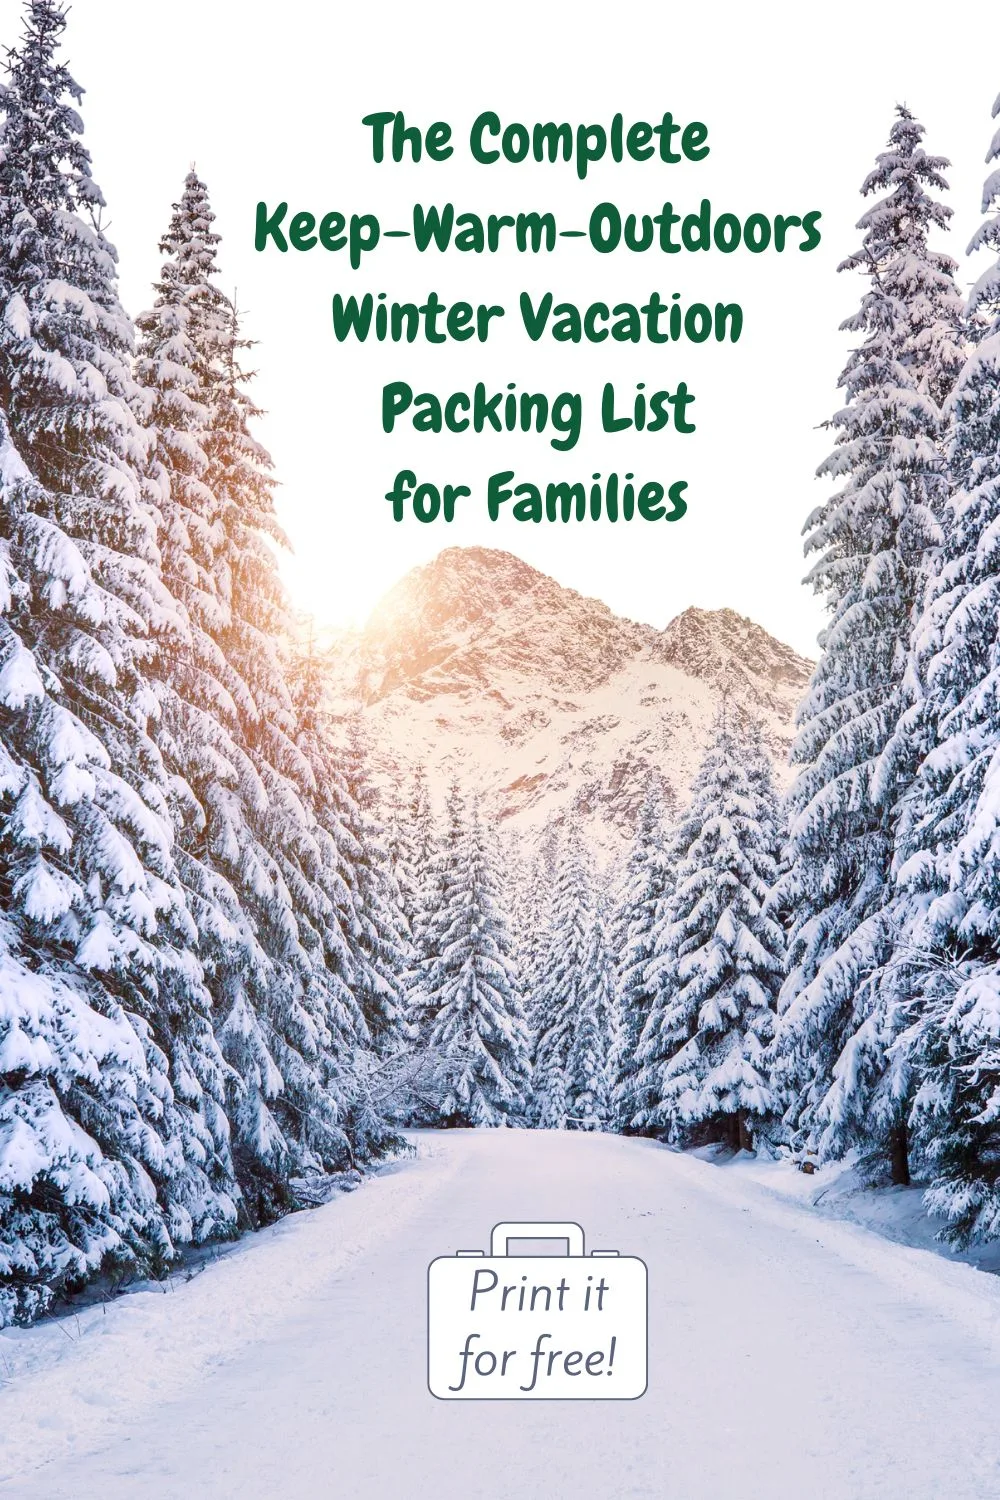 download and print this  packing list for cold-weather winter vacations with kids. clothing that will keep you warm, essential gear, snacks & more.